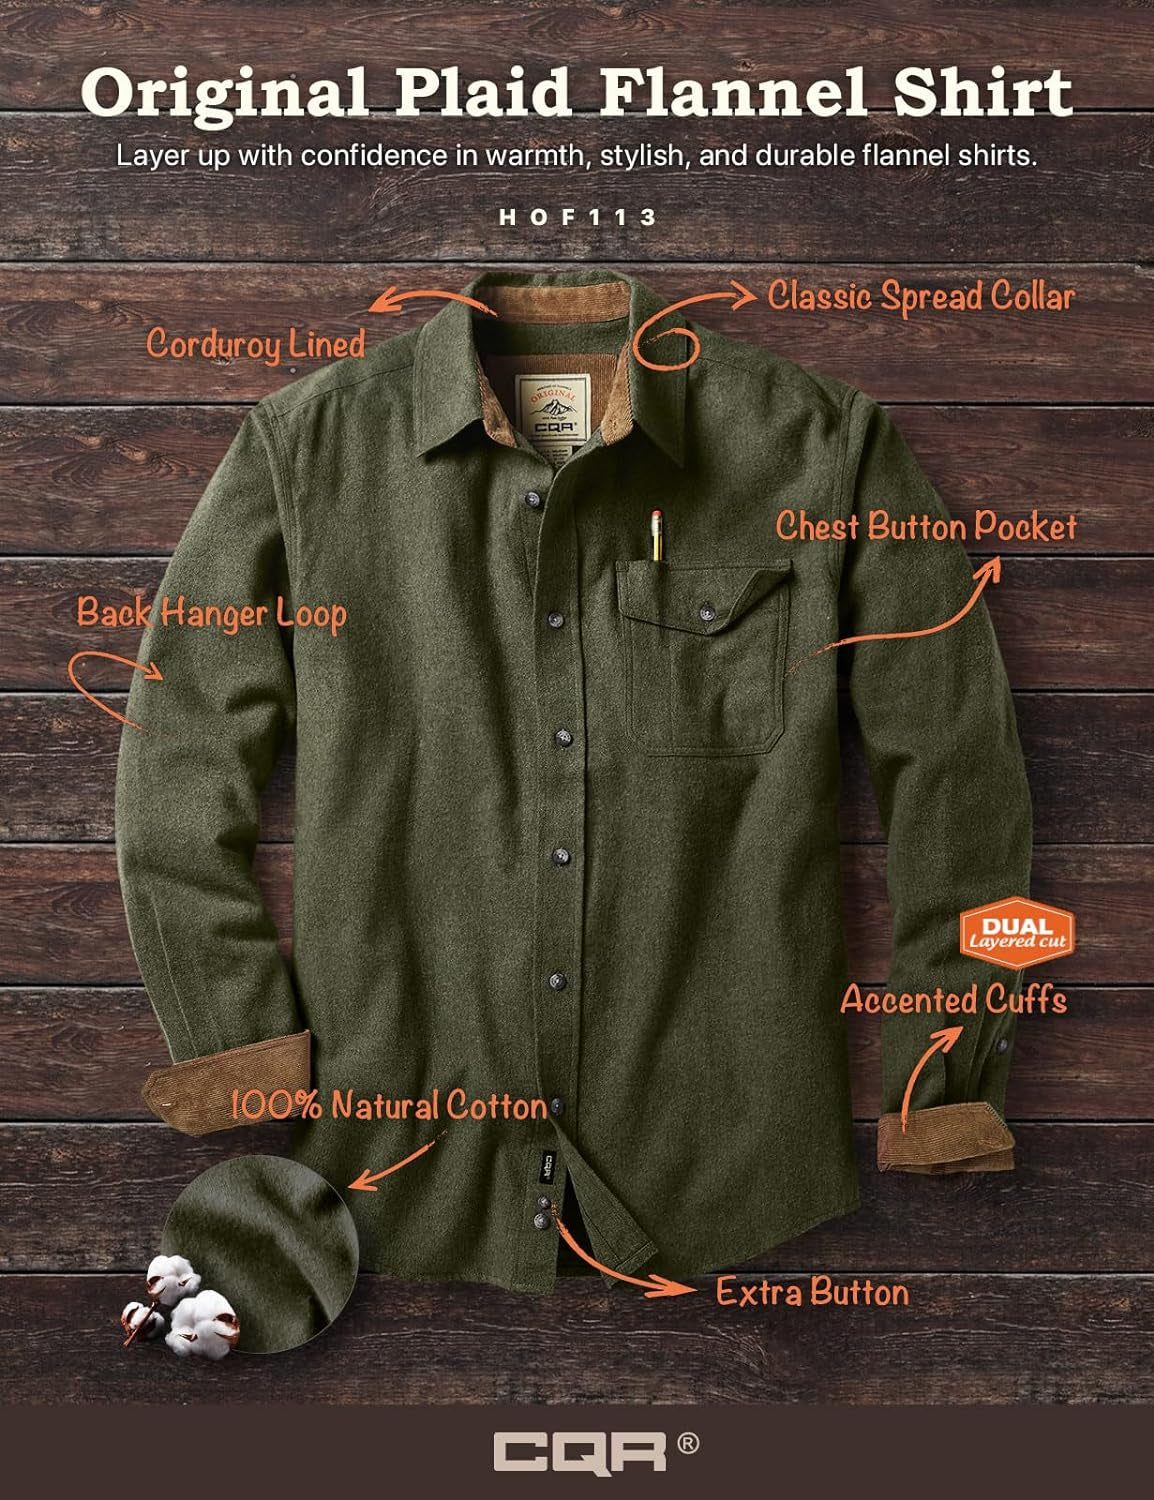 Men'S All Cotton Flannel Shirt, Long Sleeve Casual Button up Plaid Shirt, Brushed Soft Outdoor Shirts